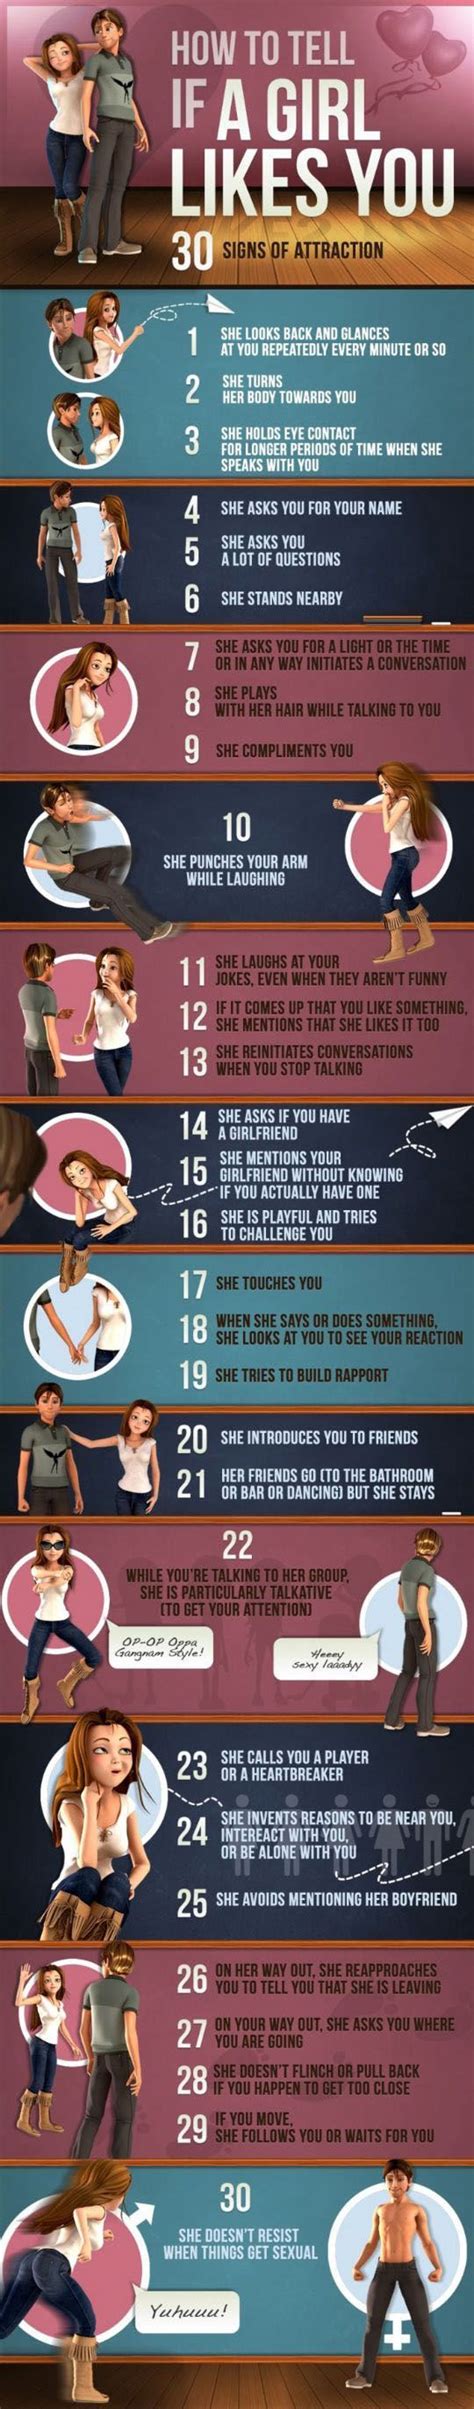 Psychology Psychology Psychology How To Tell If A Girl Likes You Love Relationships Girl